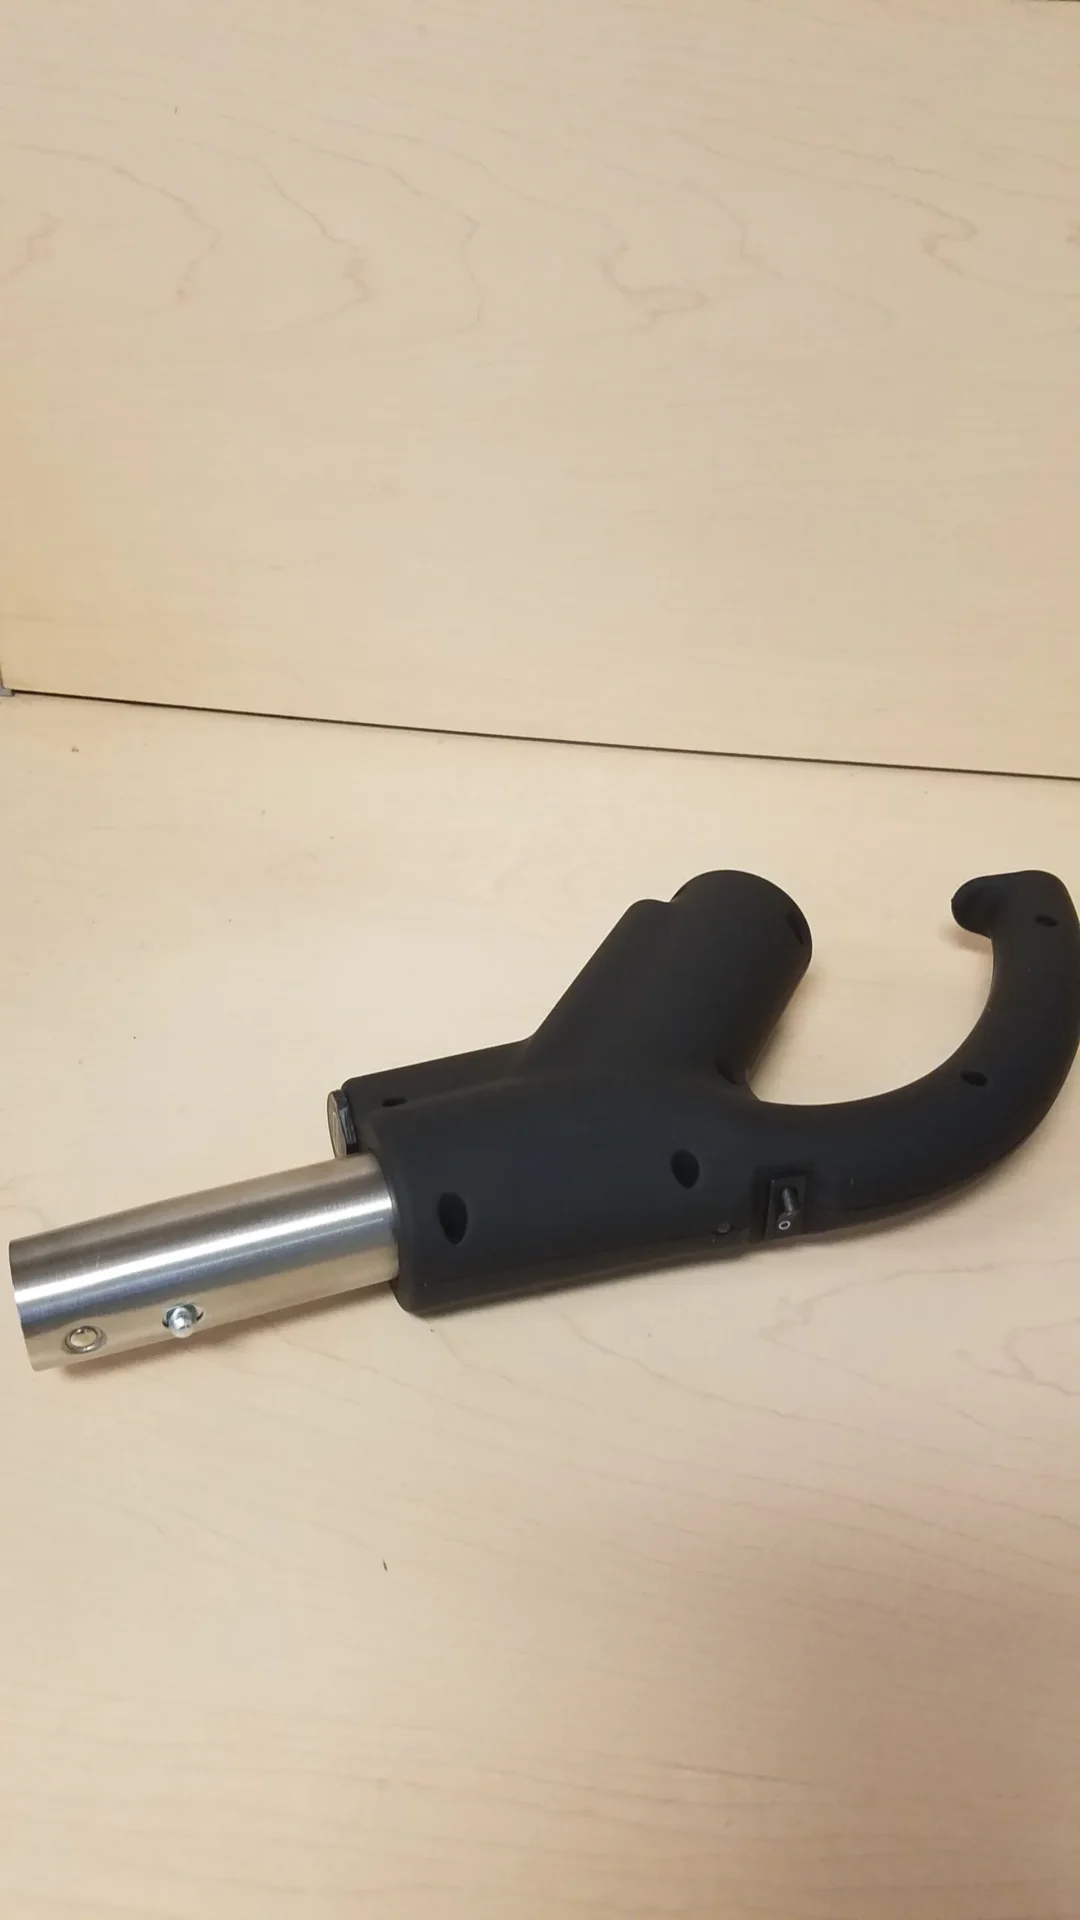 A black handle with a metal tube attached to it.